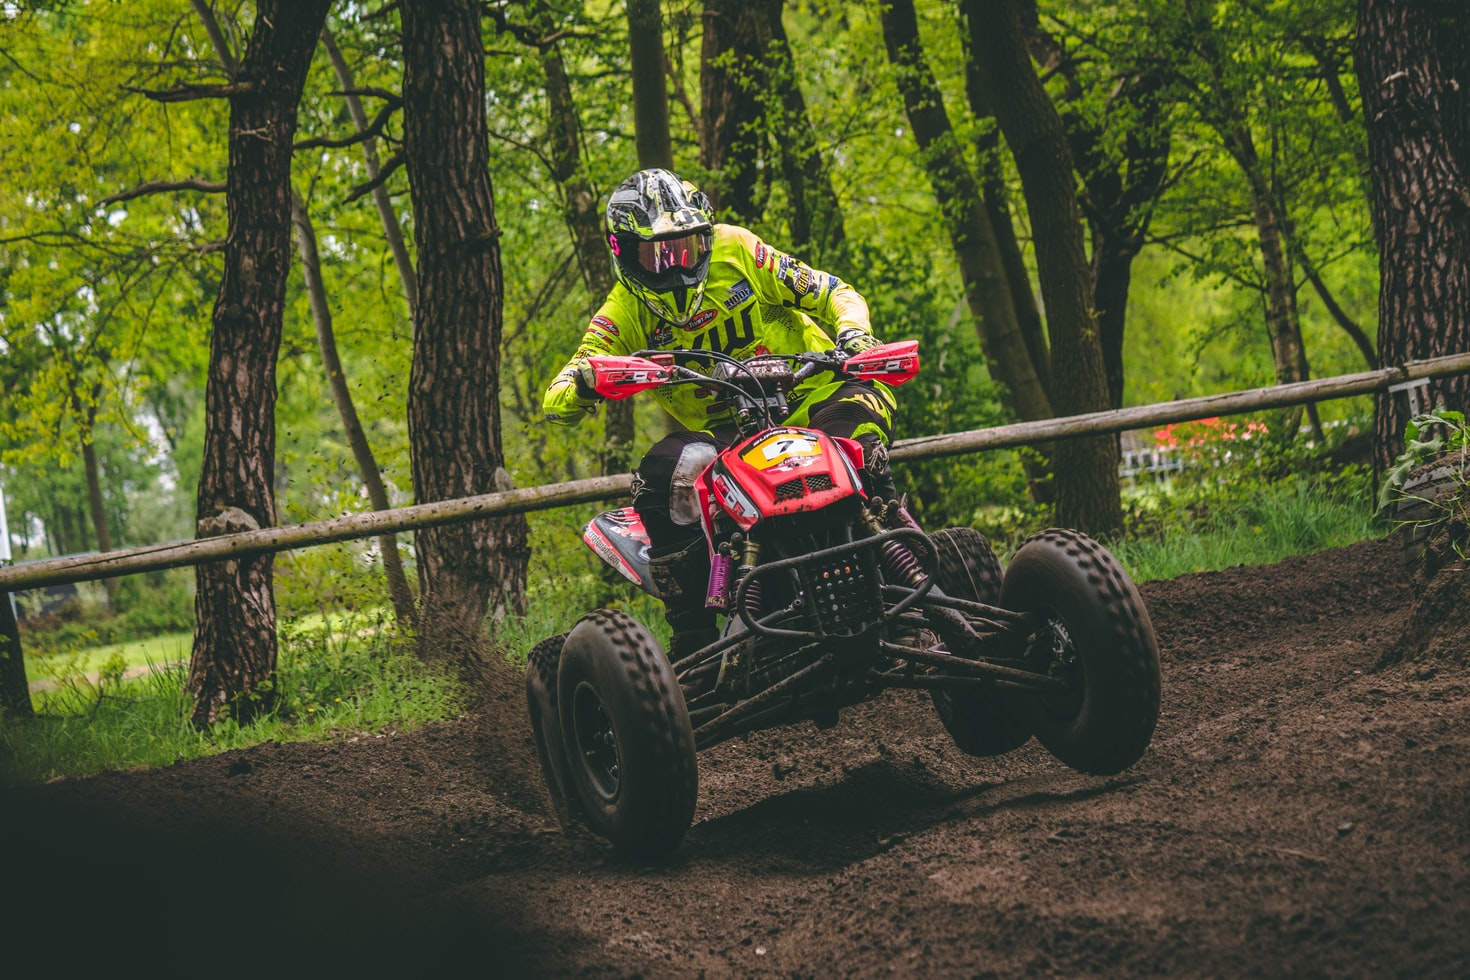 Quad Bikes Five Best Models for the Highest Speed